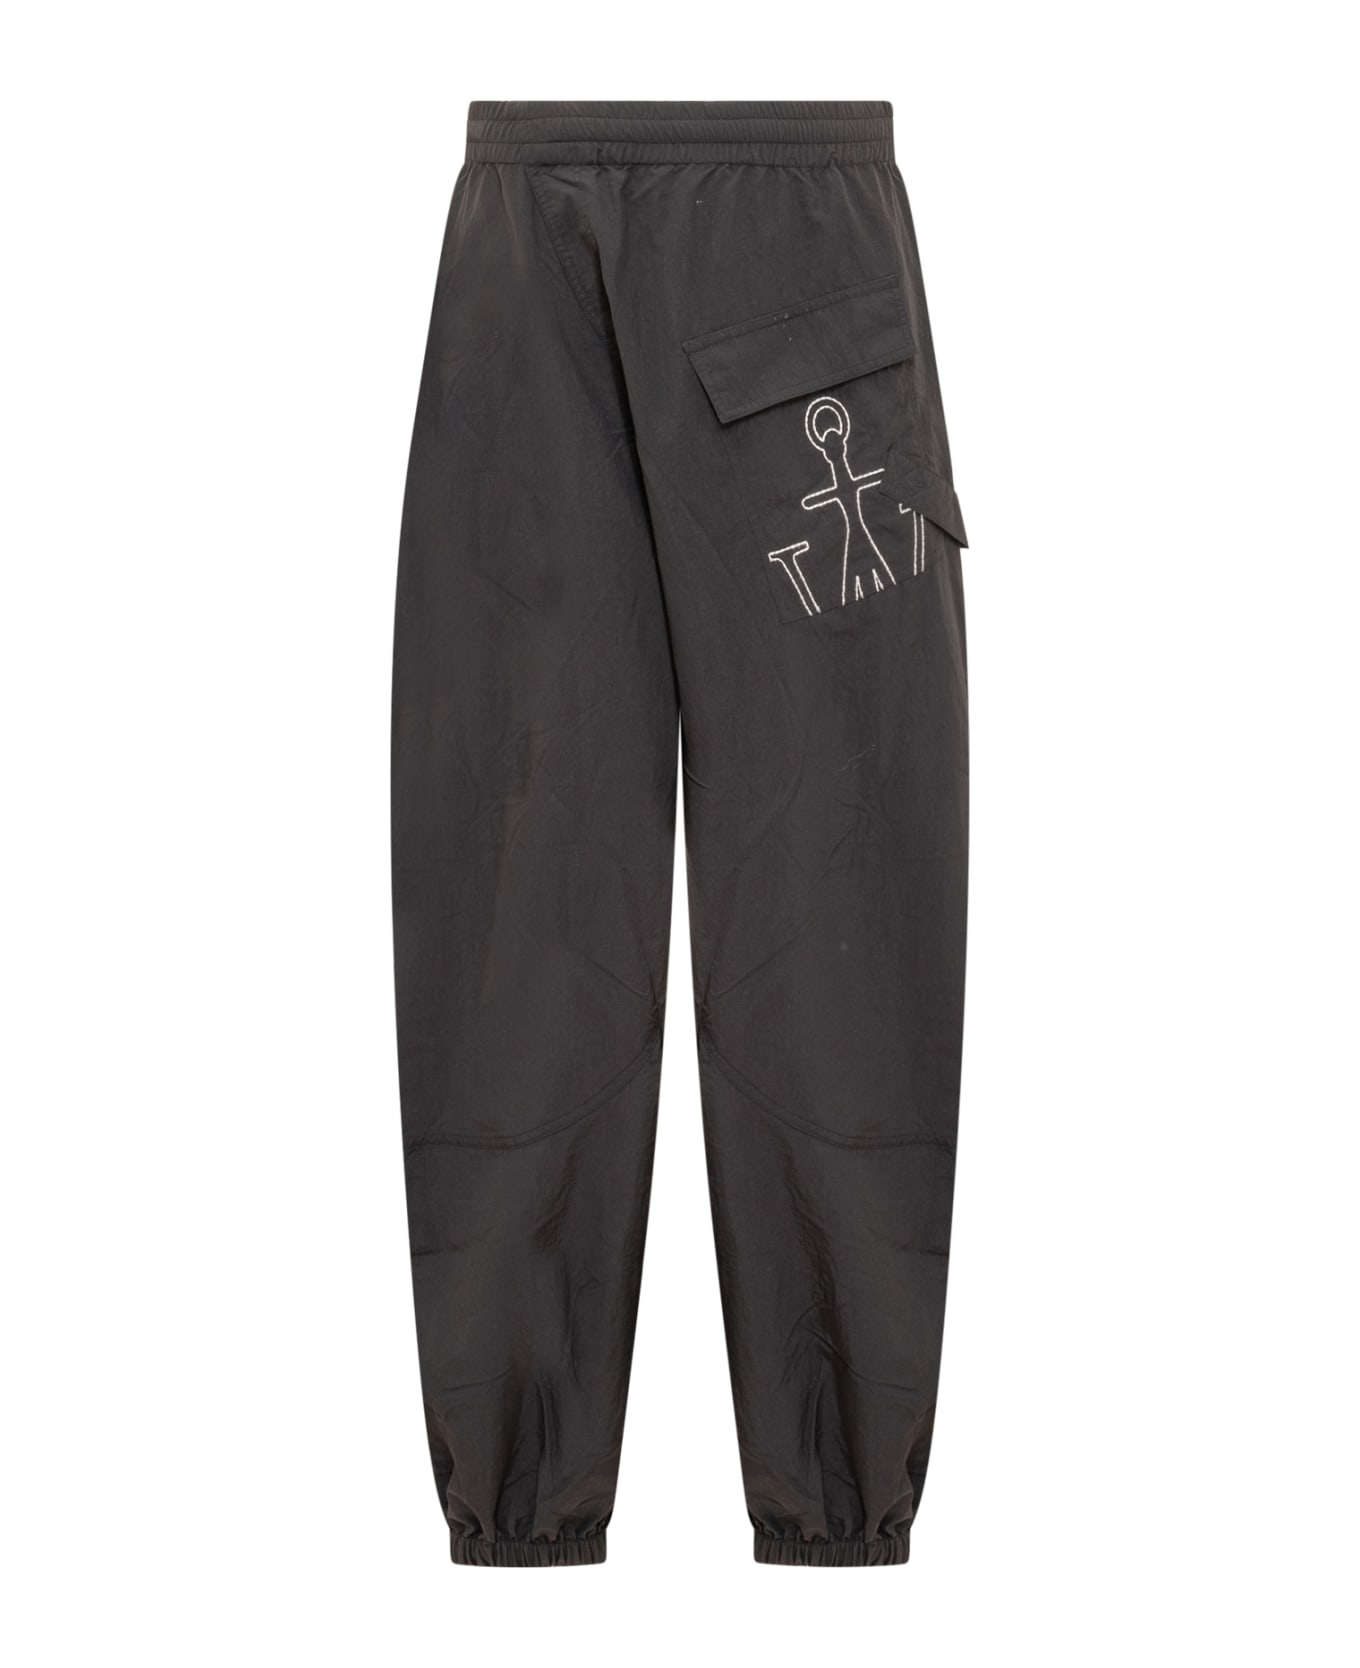 J.W. Anderson Twisted Joggers Pants - BLACK